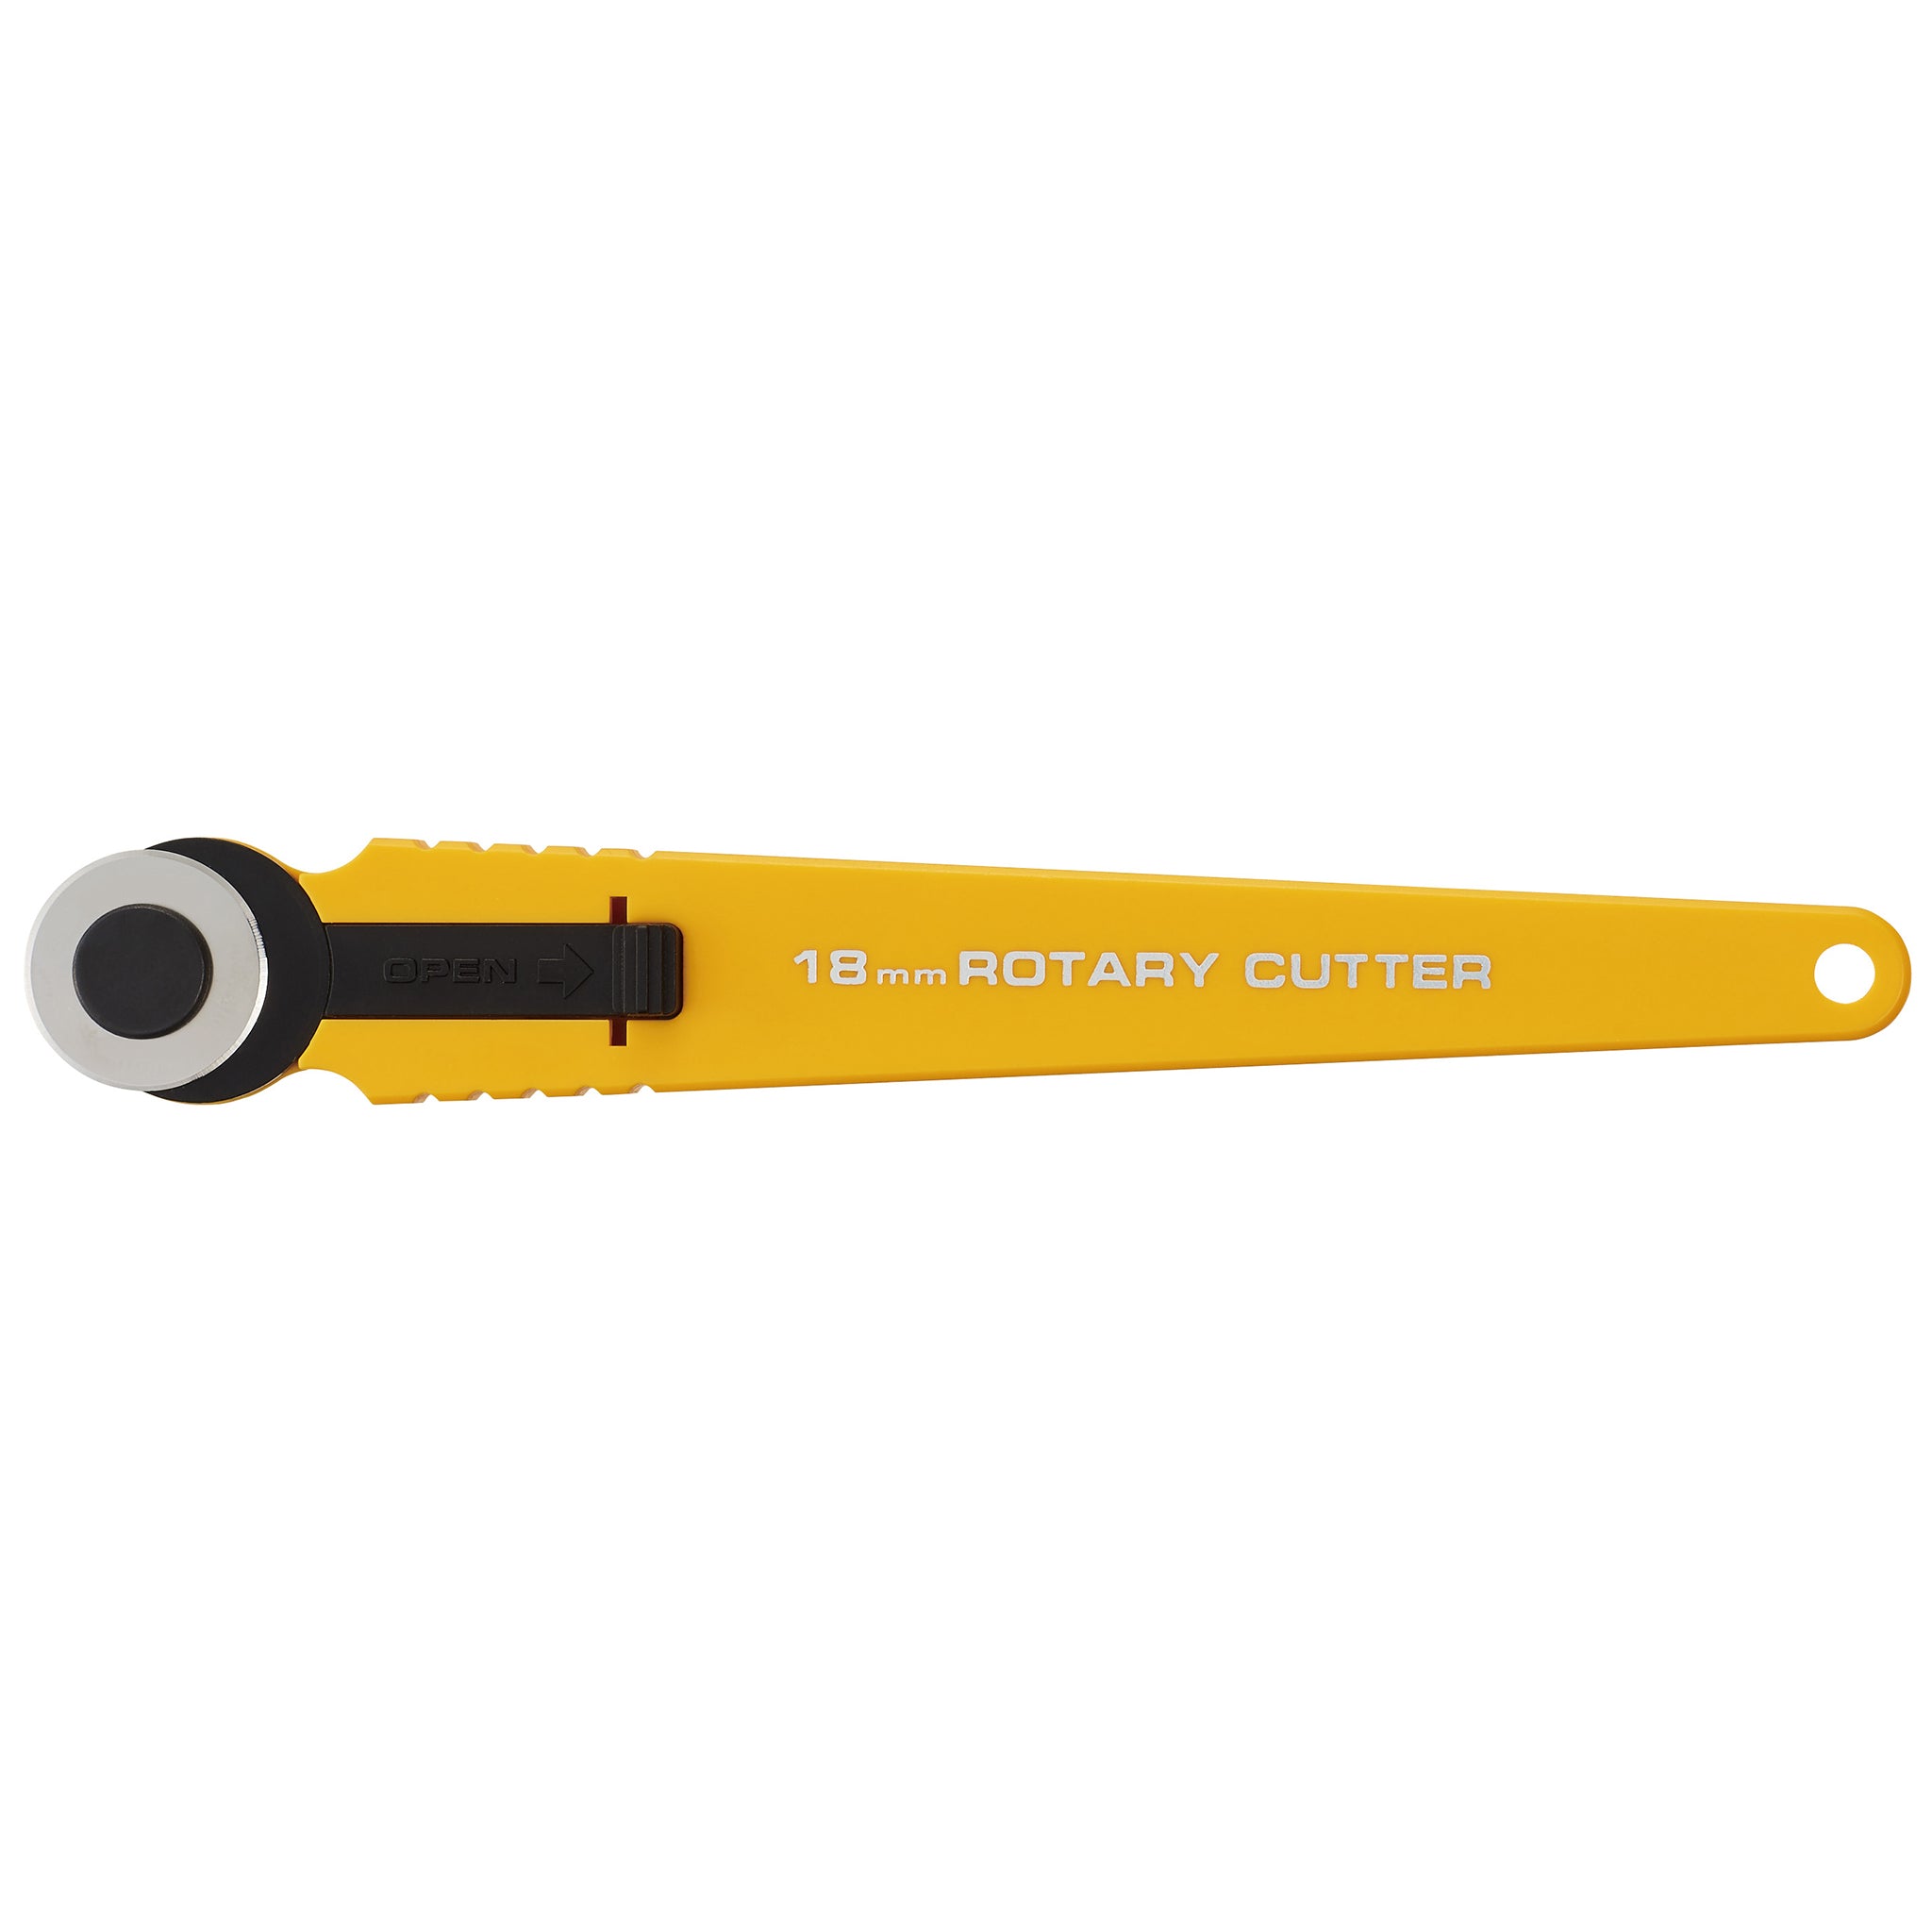 18mm RTY-4 Quick-Change Rotary Cutter